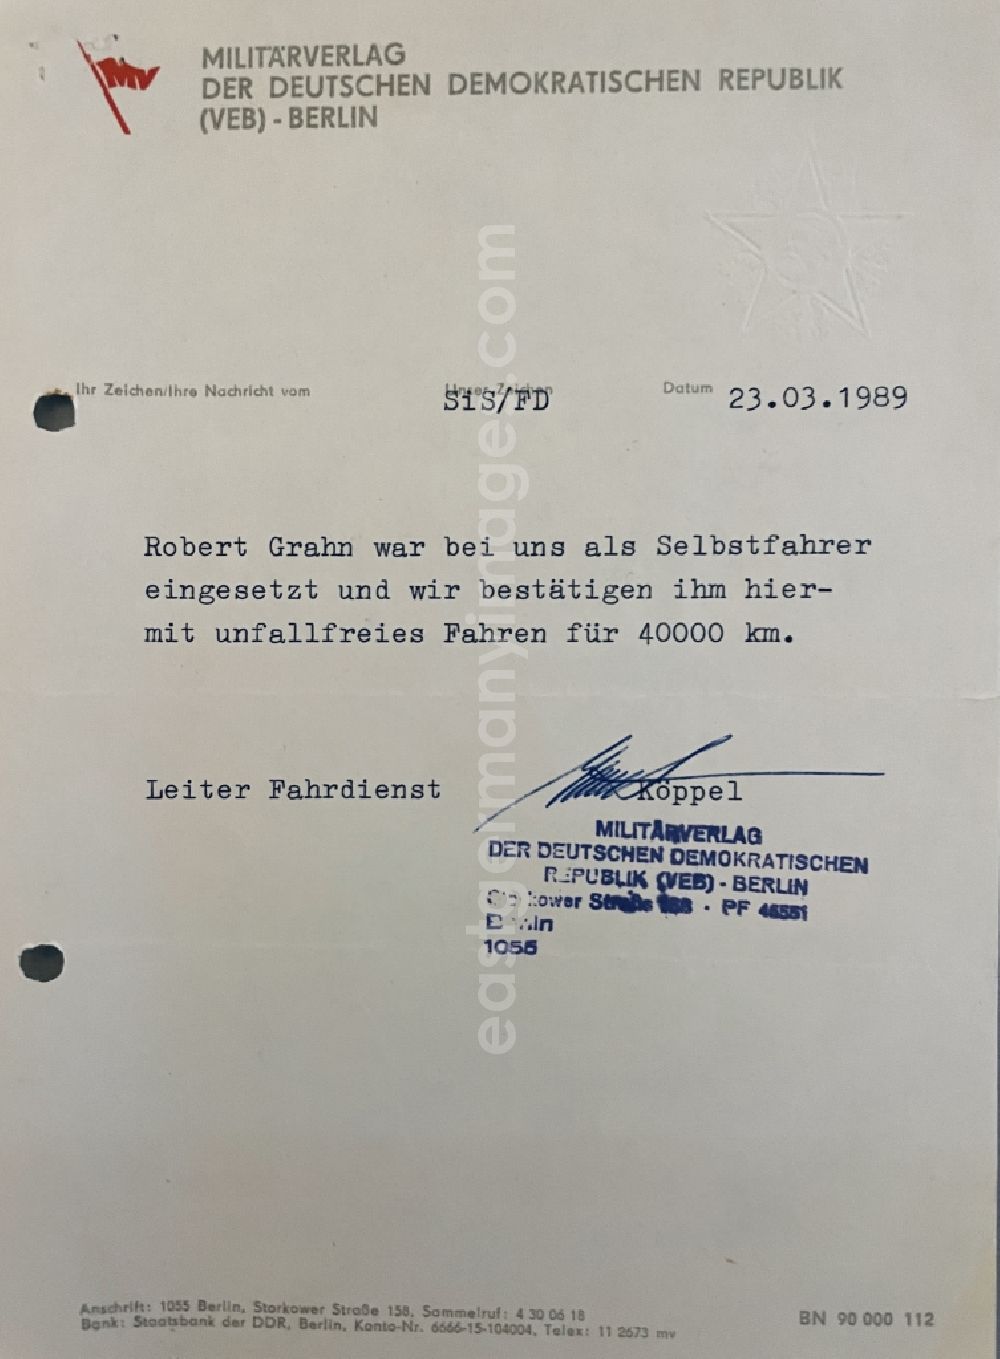 GDR photo archive: Berlin - Reproduction Certificate for accident-free driving issued in Berlin, the former capital of the GDR, German Democratic Republic